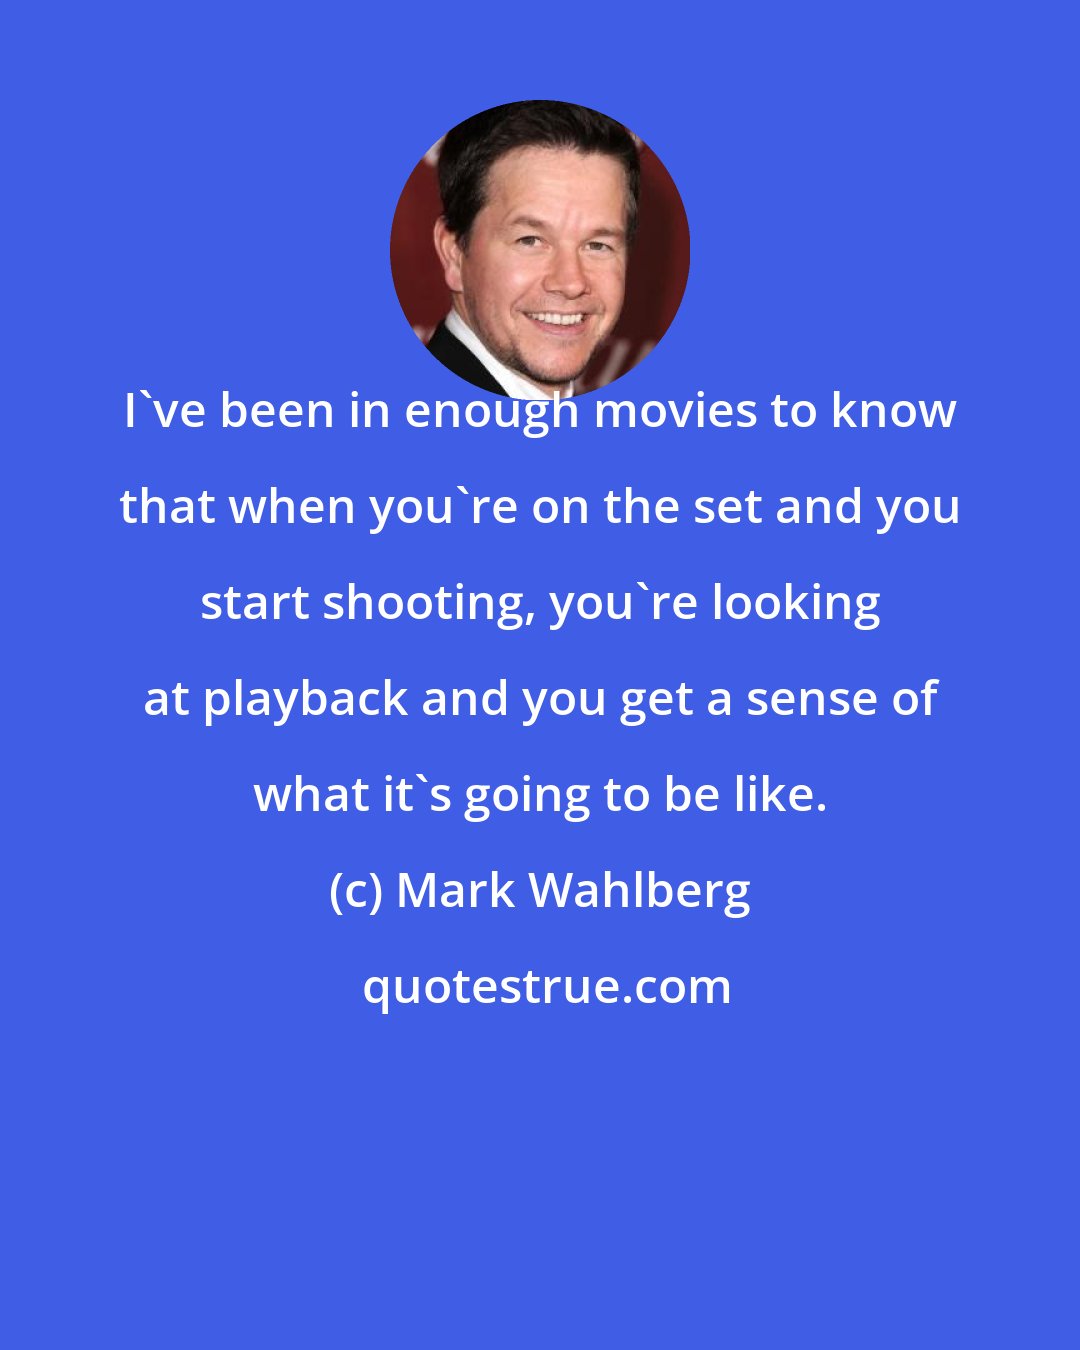 Mark Wahlberg: I've been in enough movies to know that when you're on the set and you start shooting, you're looking at playback and you get a sense of what it's going to be like.